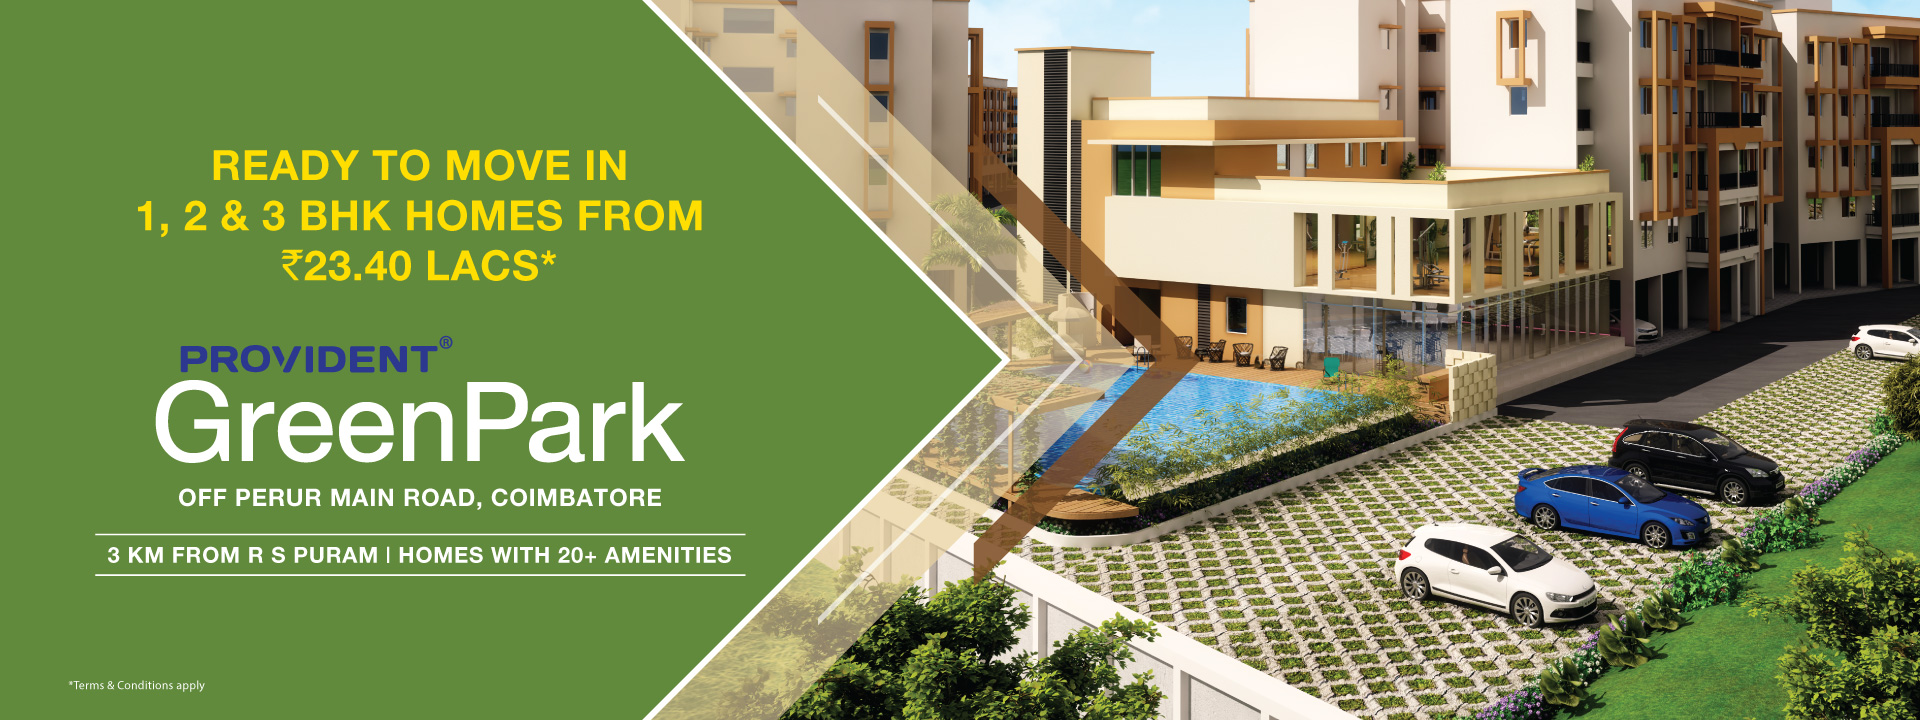 Apartments starting from Rs 23.40 Lakh at Provident Green Park in Coimbatore